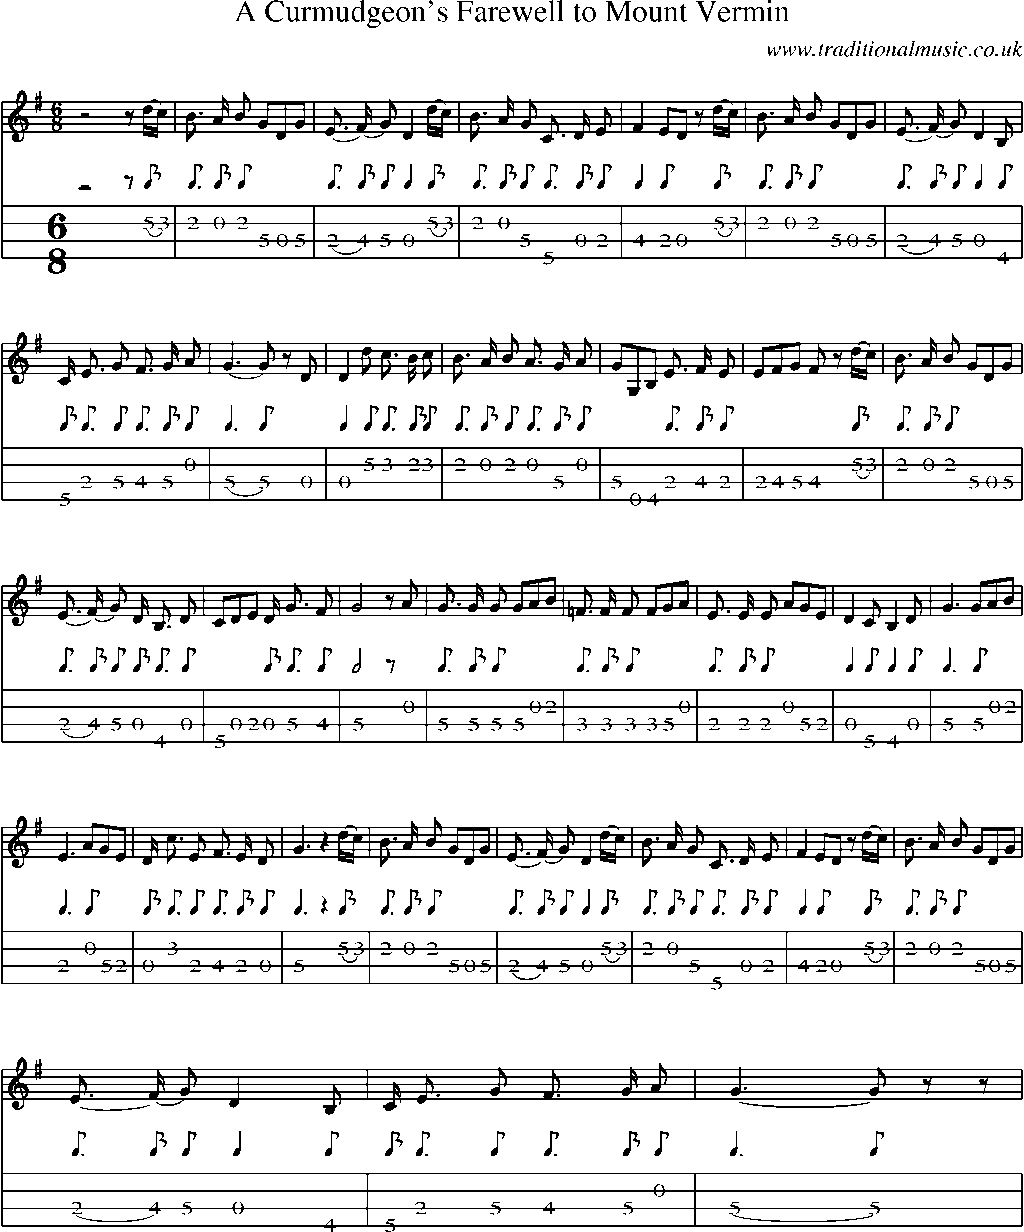 Mandolin Tab and Sheet Music for A Curmudgeon's Farewell To Mount Vermin